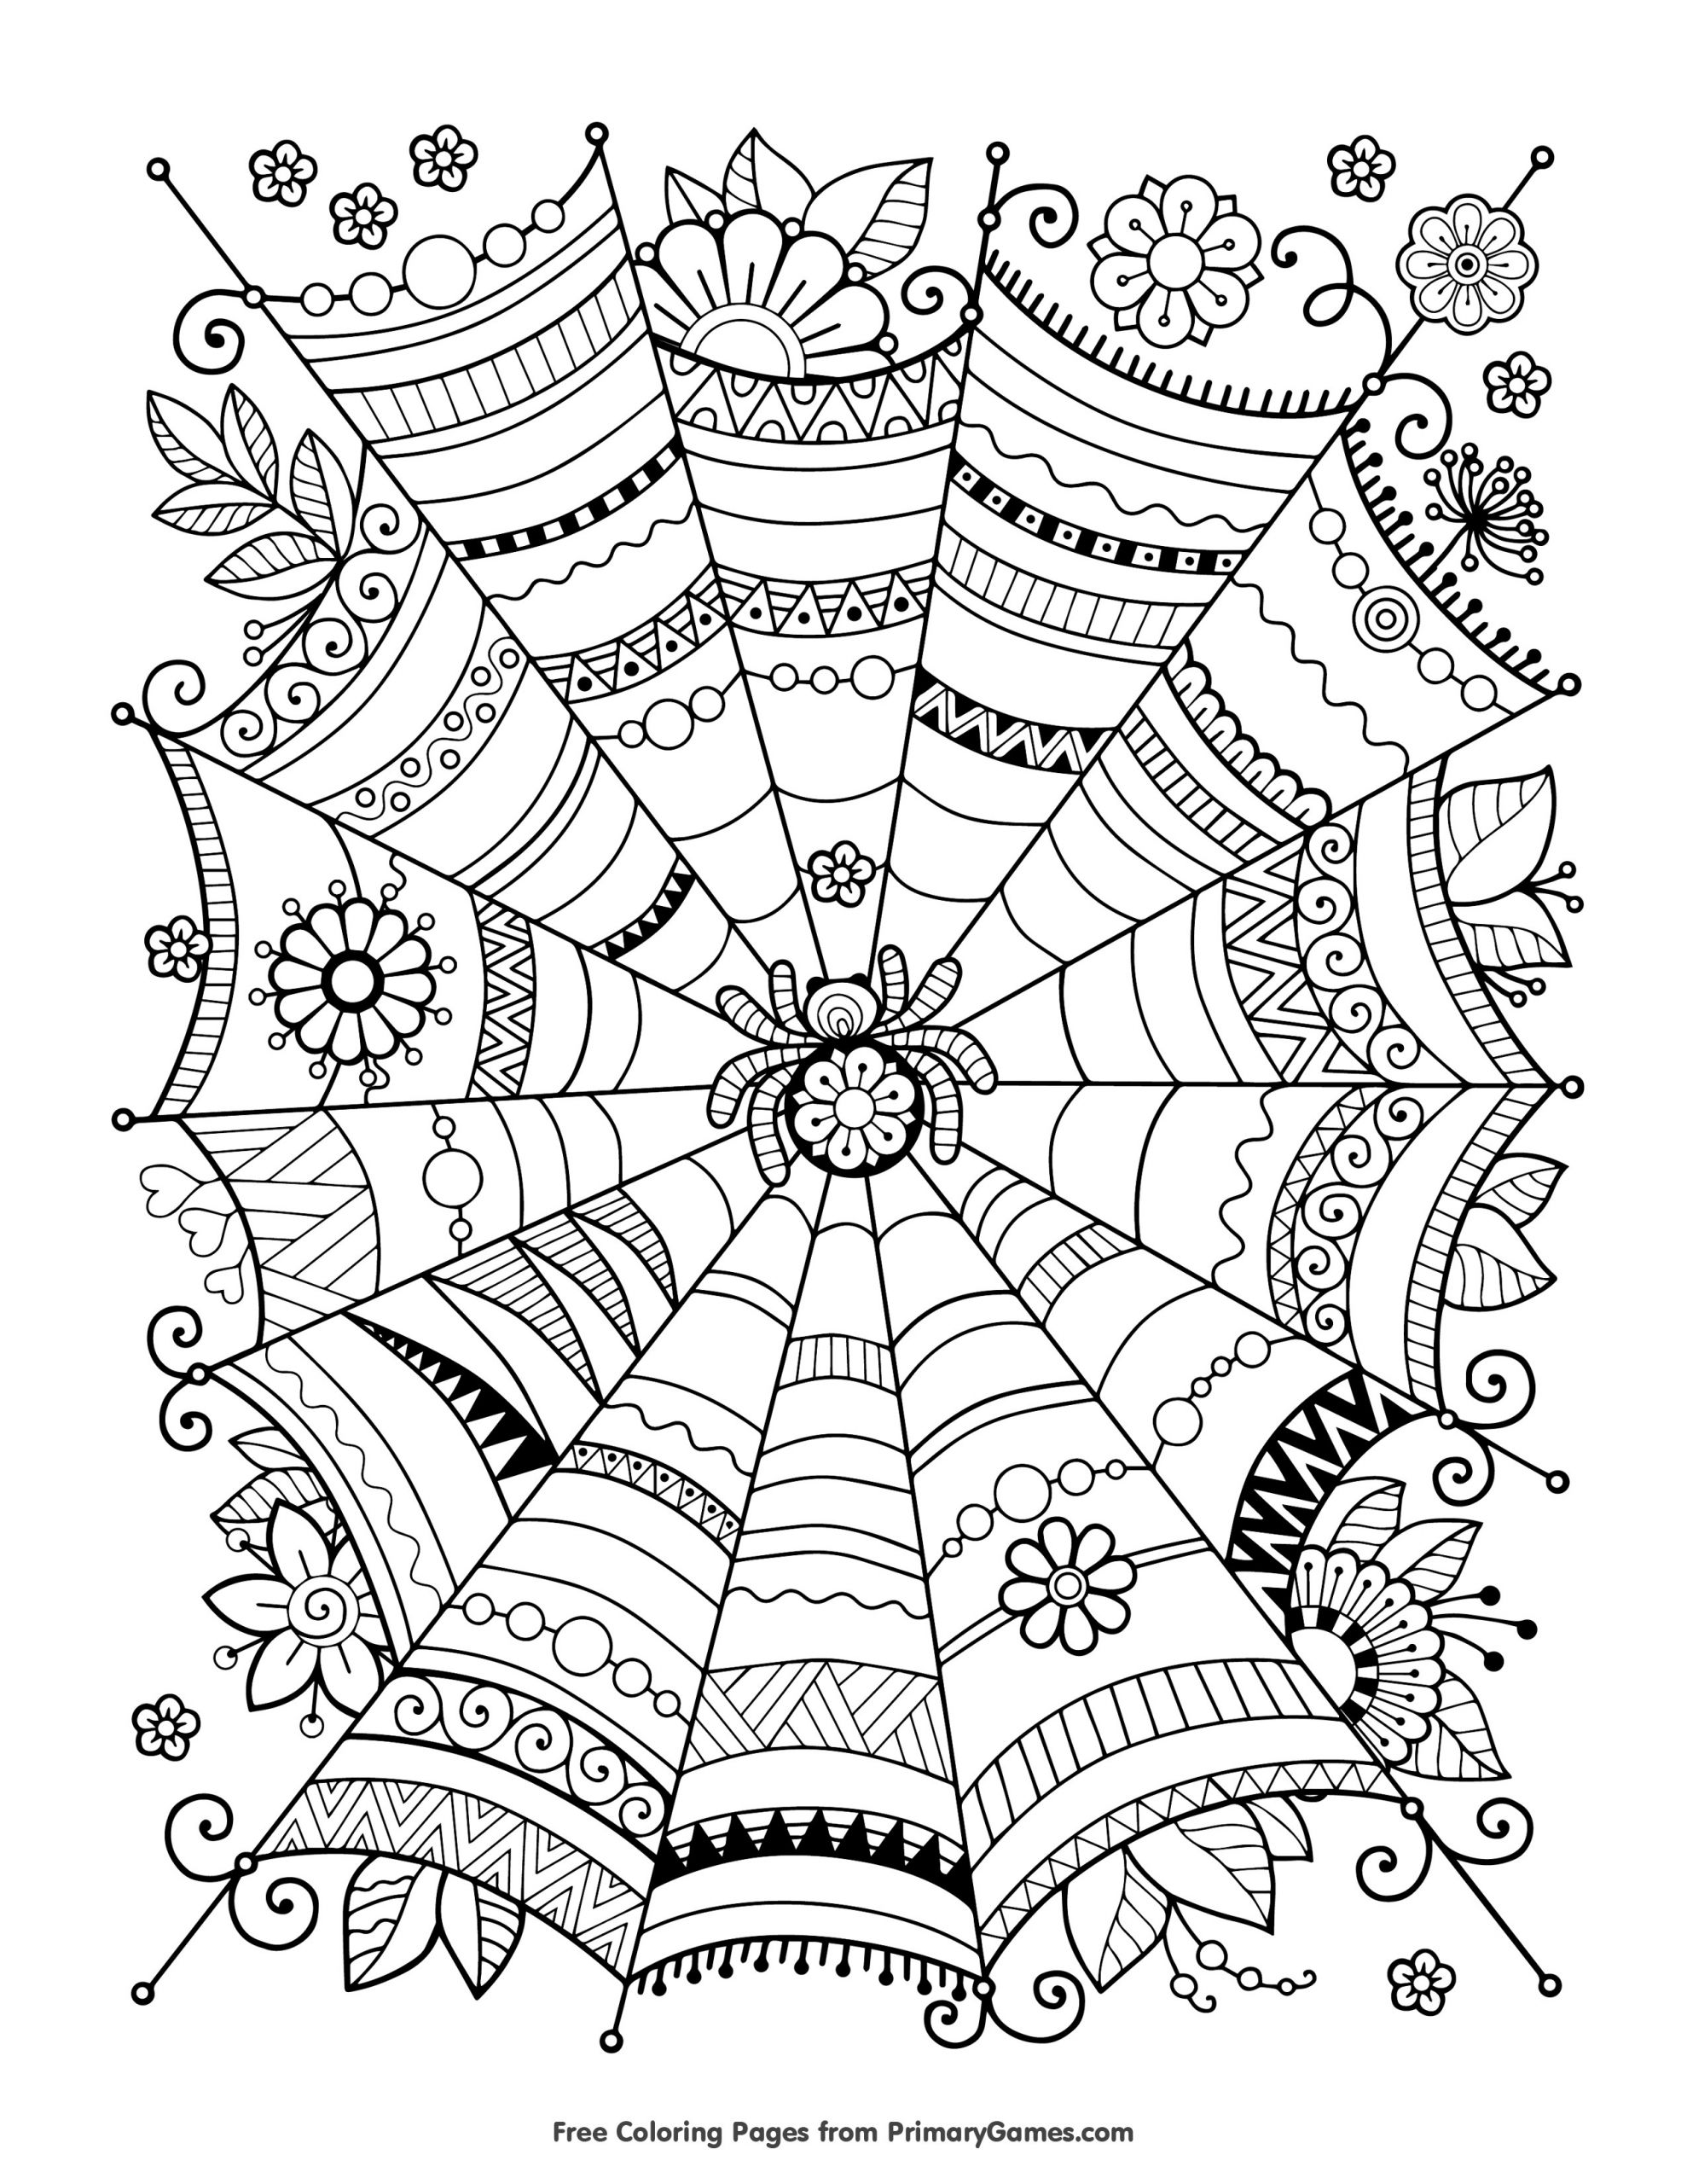 Free Printable Halloween Coloring Pages Adults
 FREE Halloween Coloring Pages for Adults & Kids